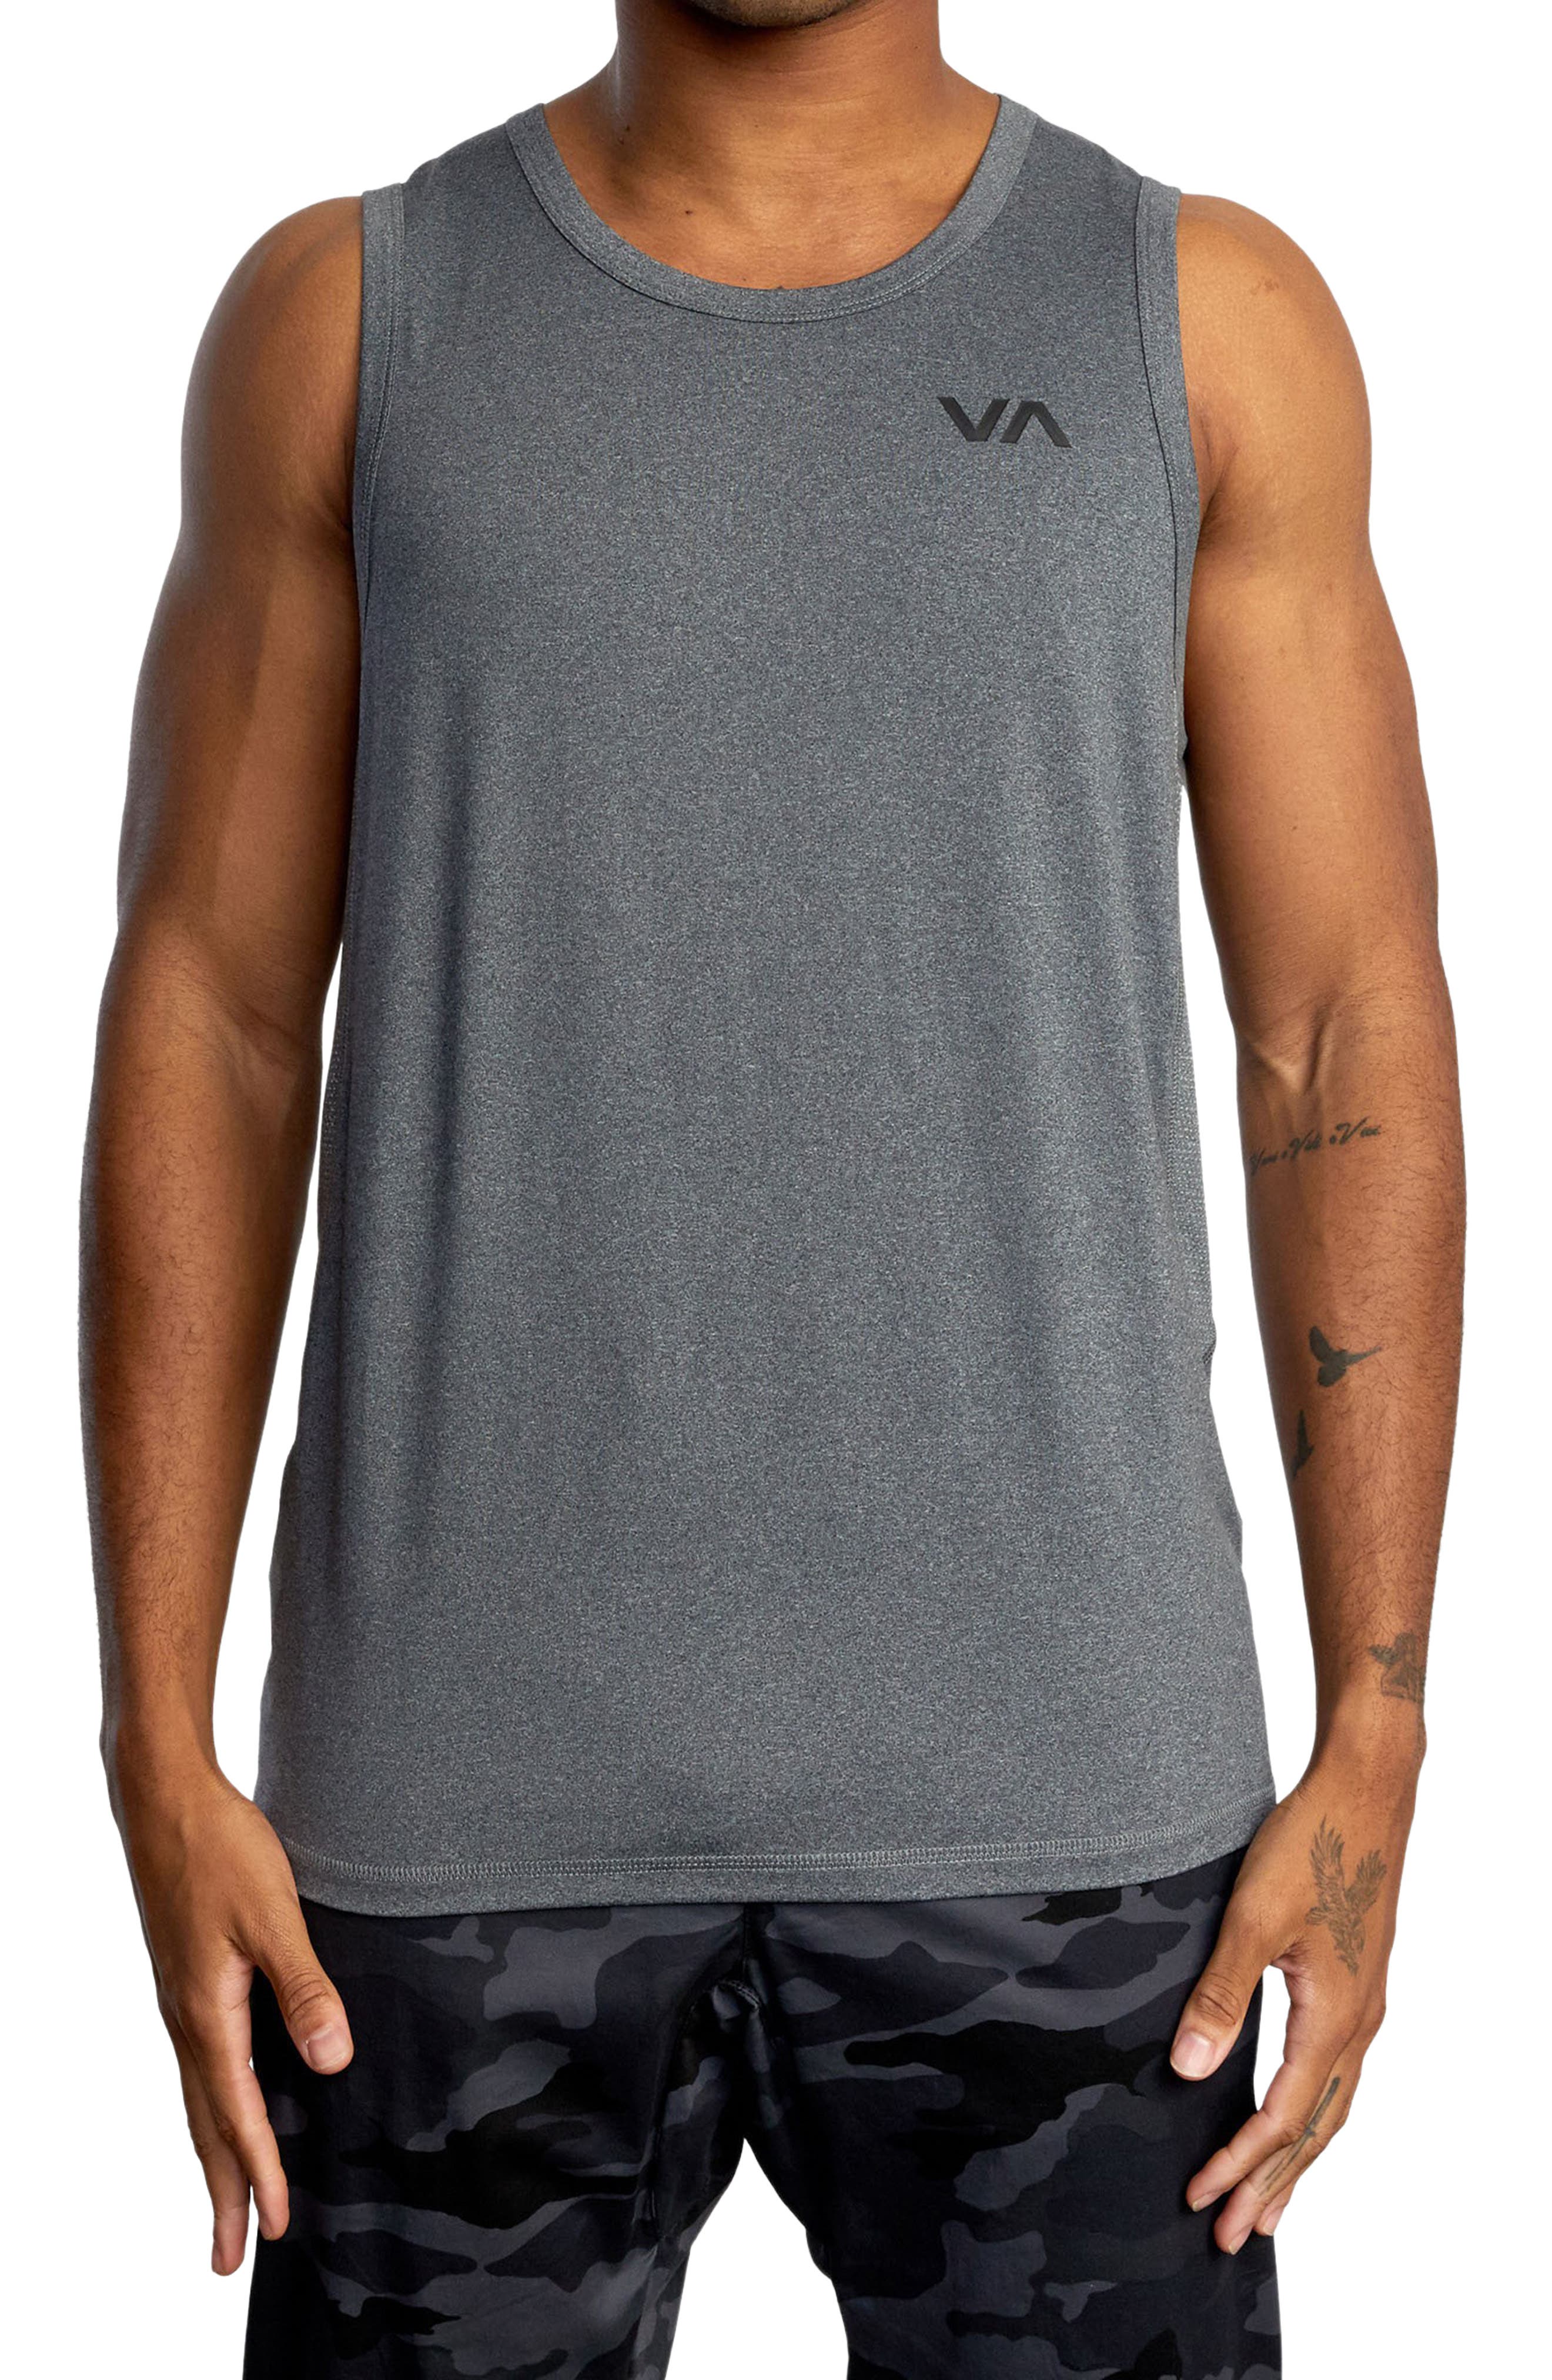 Nordstrom Boys Clothing Tops Tank Tops The Boy Cotton Tank in Pirate Black at Nordstrom 